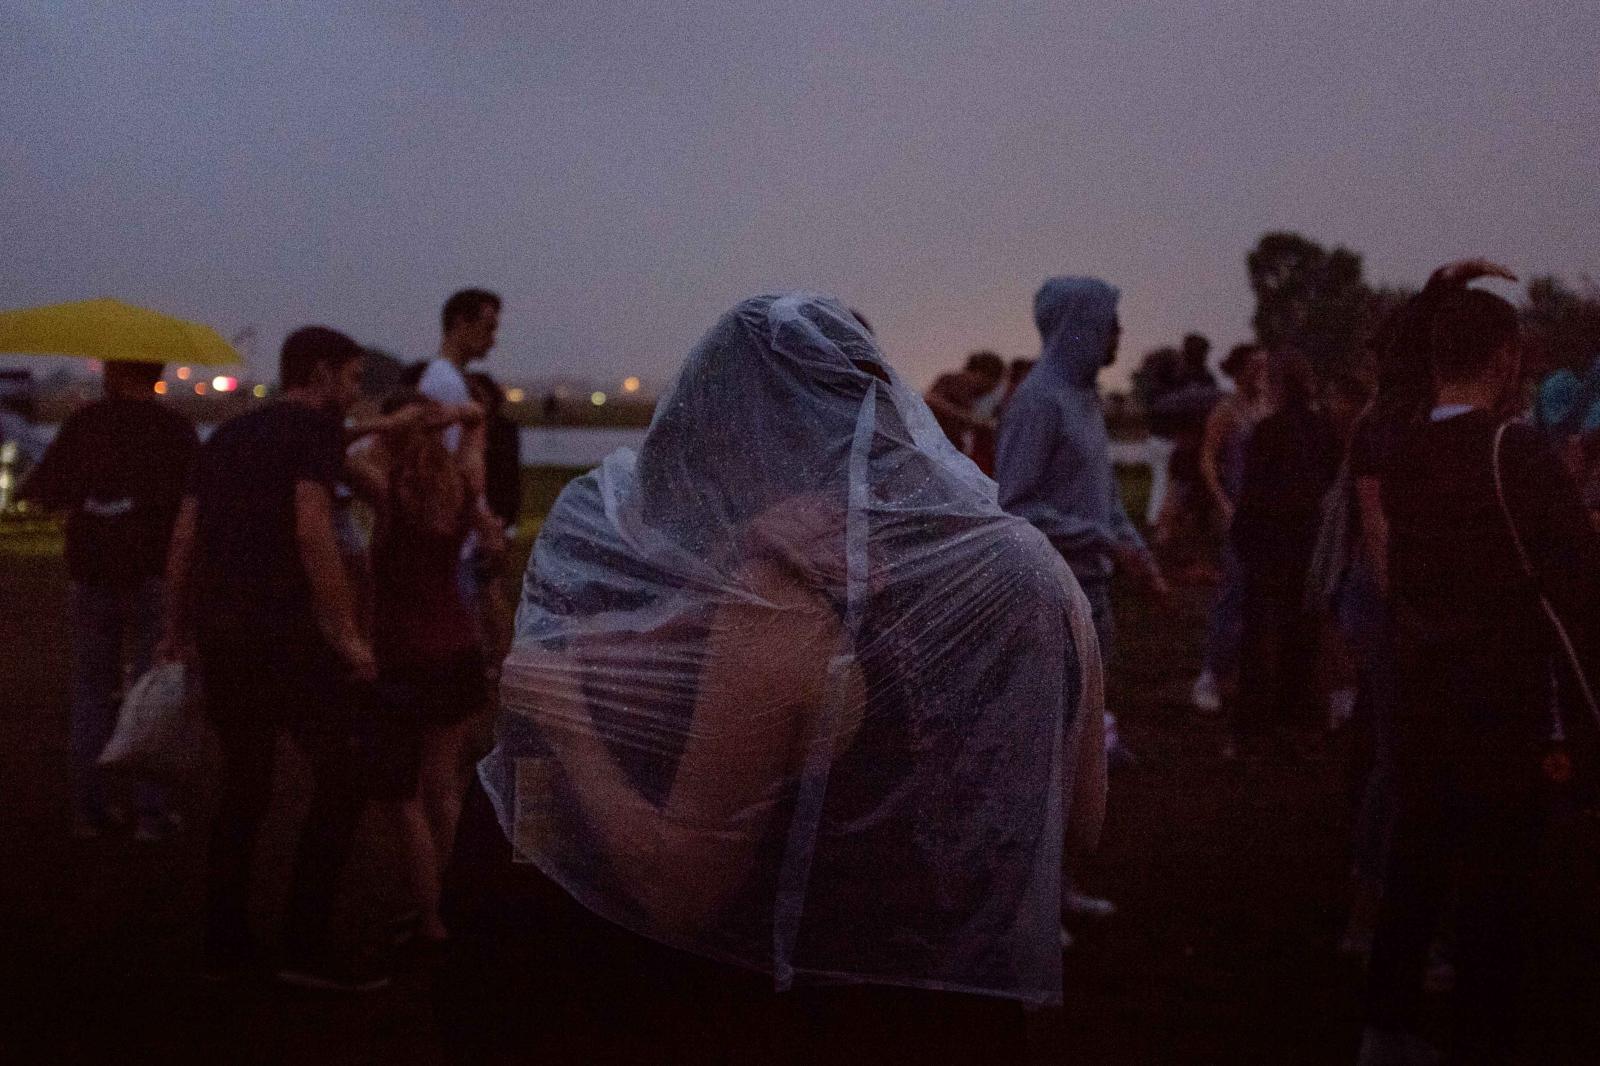 The Lovers II. A couple kisses as they share a rain cape at a dance event on Tempelhofer Feld. For many, summertime has been a welcome return to some type of normalcy in the Coronavirus pandemic. Berlin, August 2021.